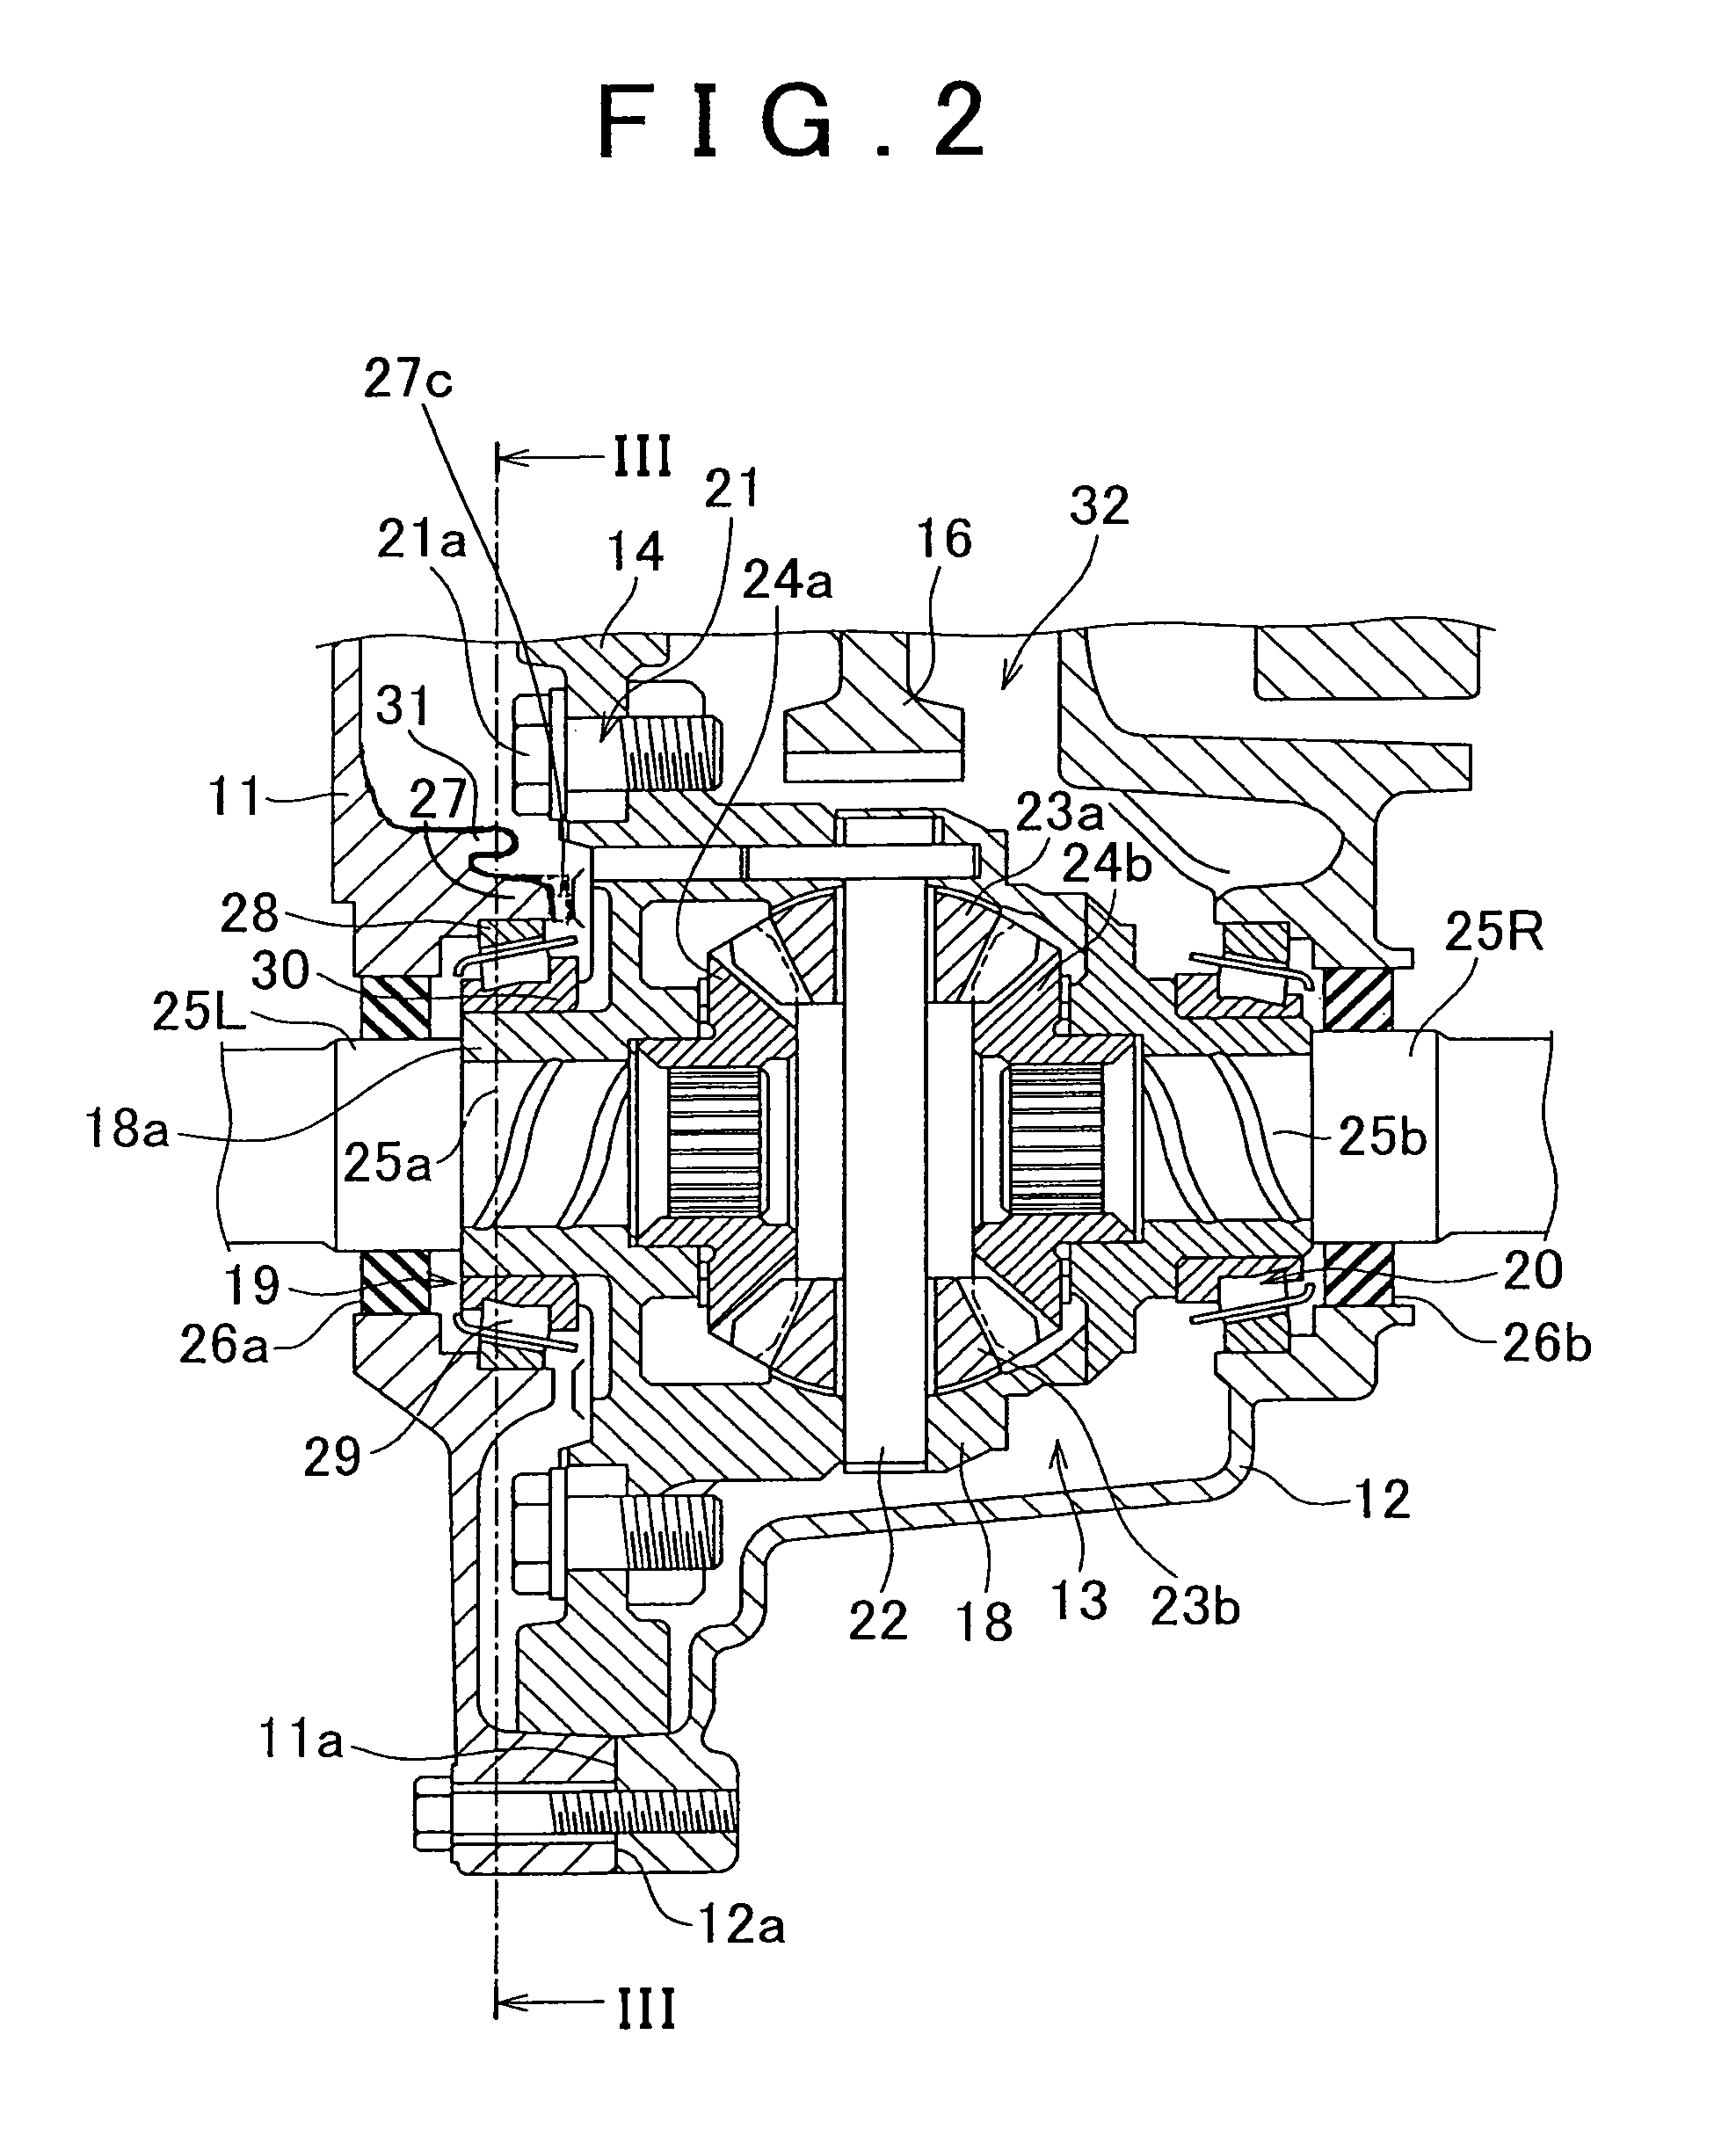 Lubrication structure of differential gear unit